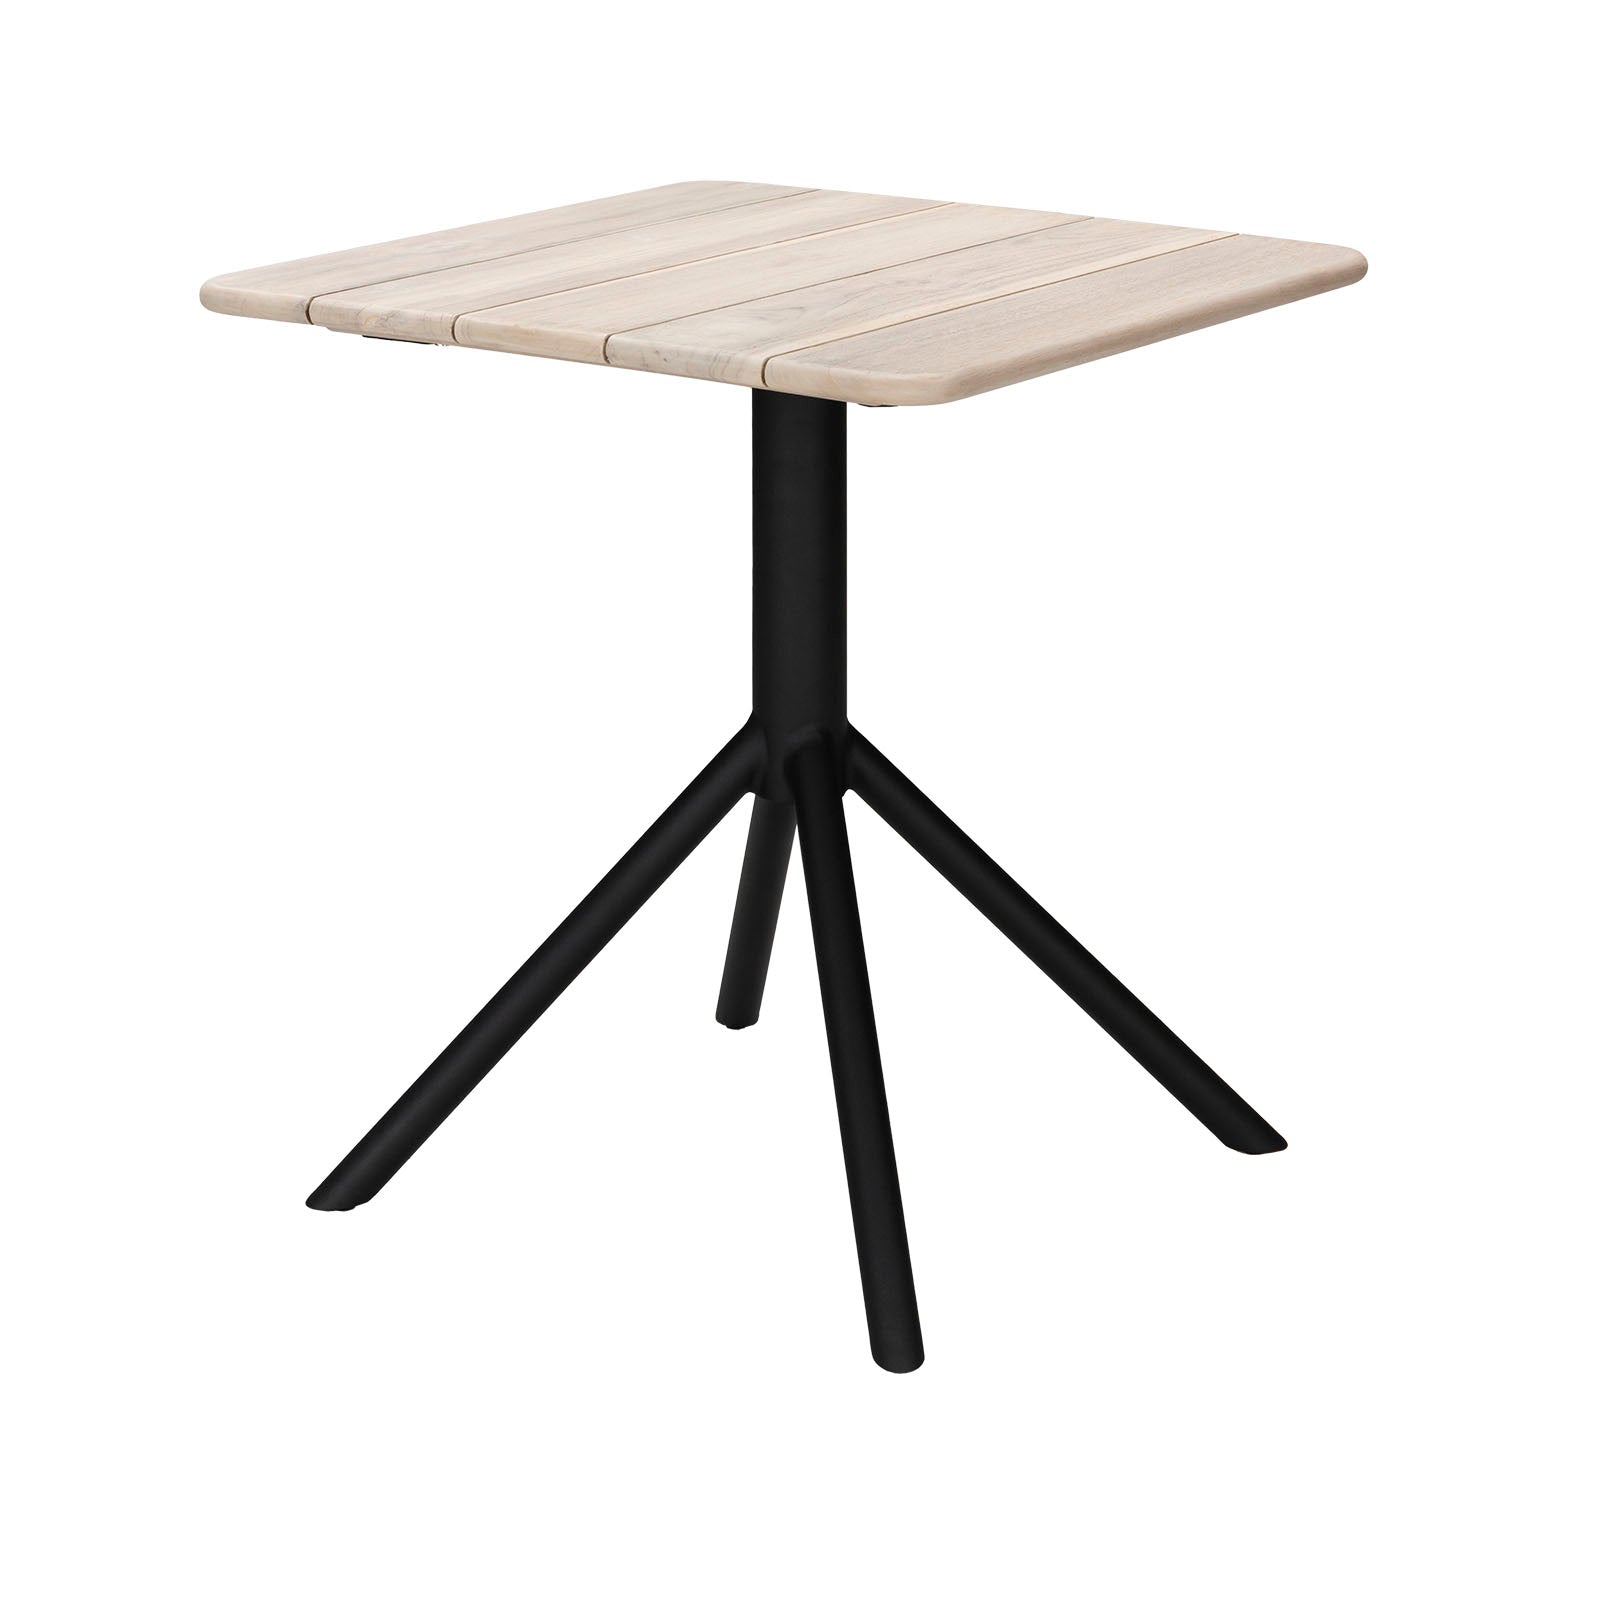 Andy Square Reclaimed Teak Bistro Table